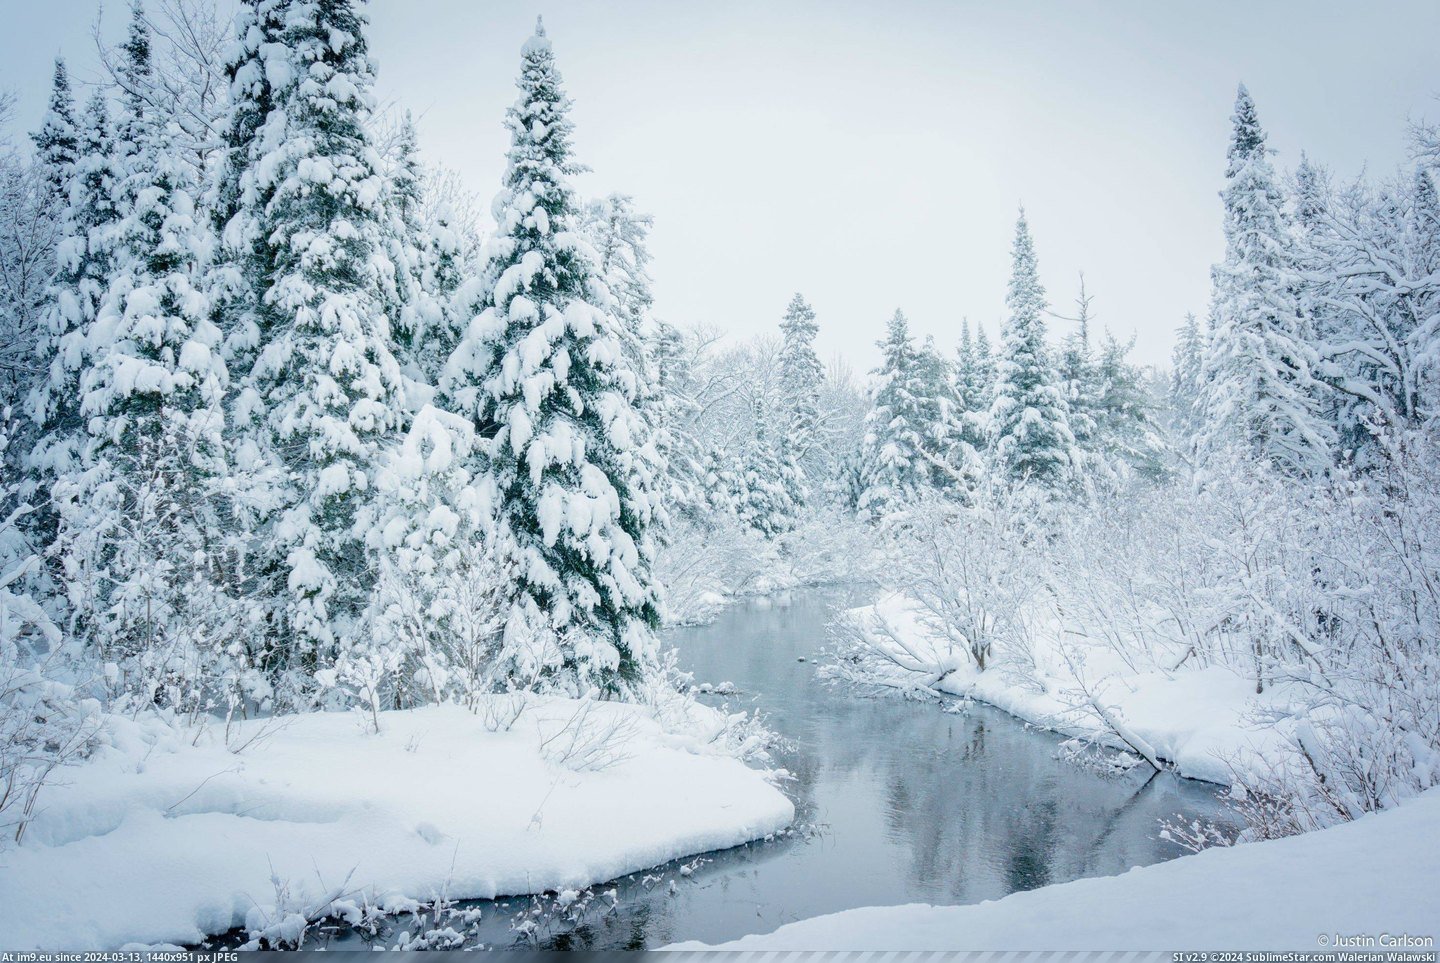 #Photo #River #Michigan #Snowfall #4912x3264 #Upper #Peninsula #Justin [Earthporn] The Carp River after today's snowfall in Michigan's Upper Peninsula. Photo by Justin Carlson [4912x3264] Pic. (Obraz z album My r/EARTHPORN favs))